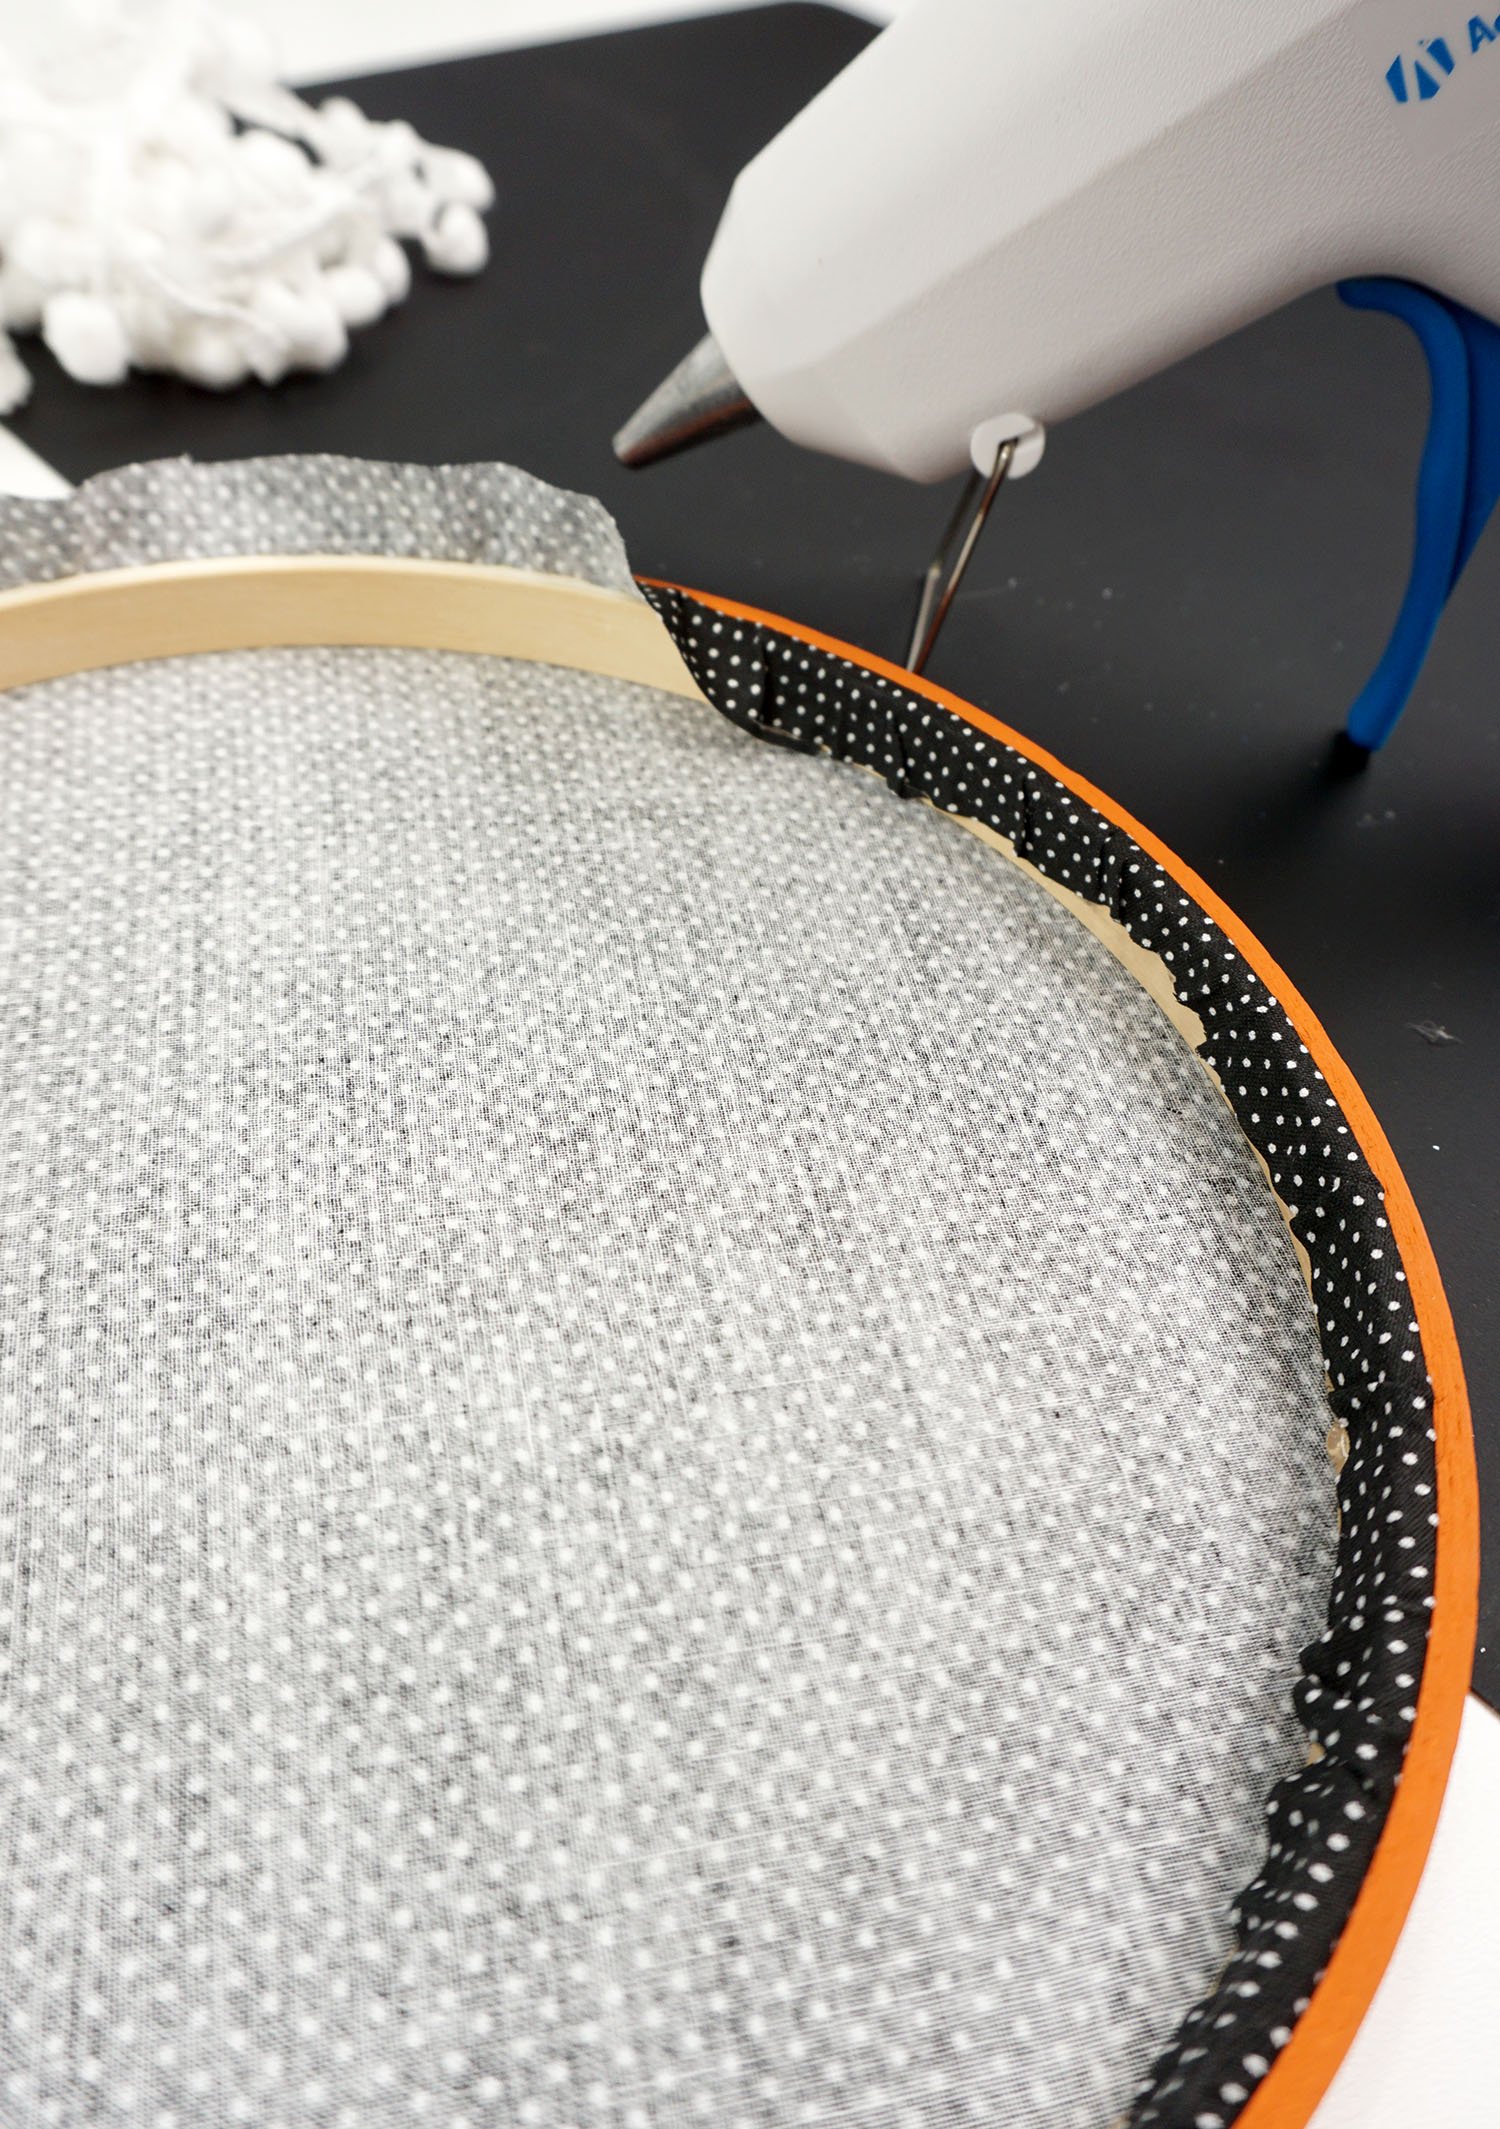 finish glueing the excess onto the embroidery hoop